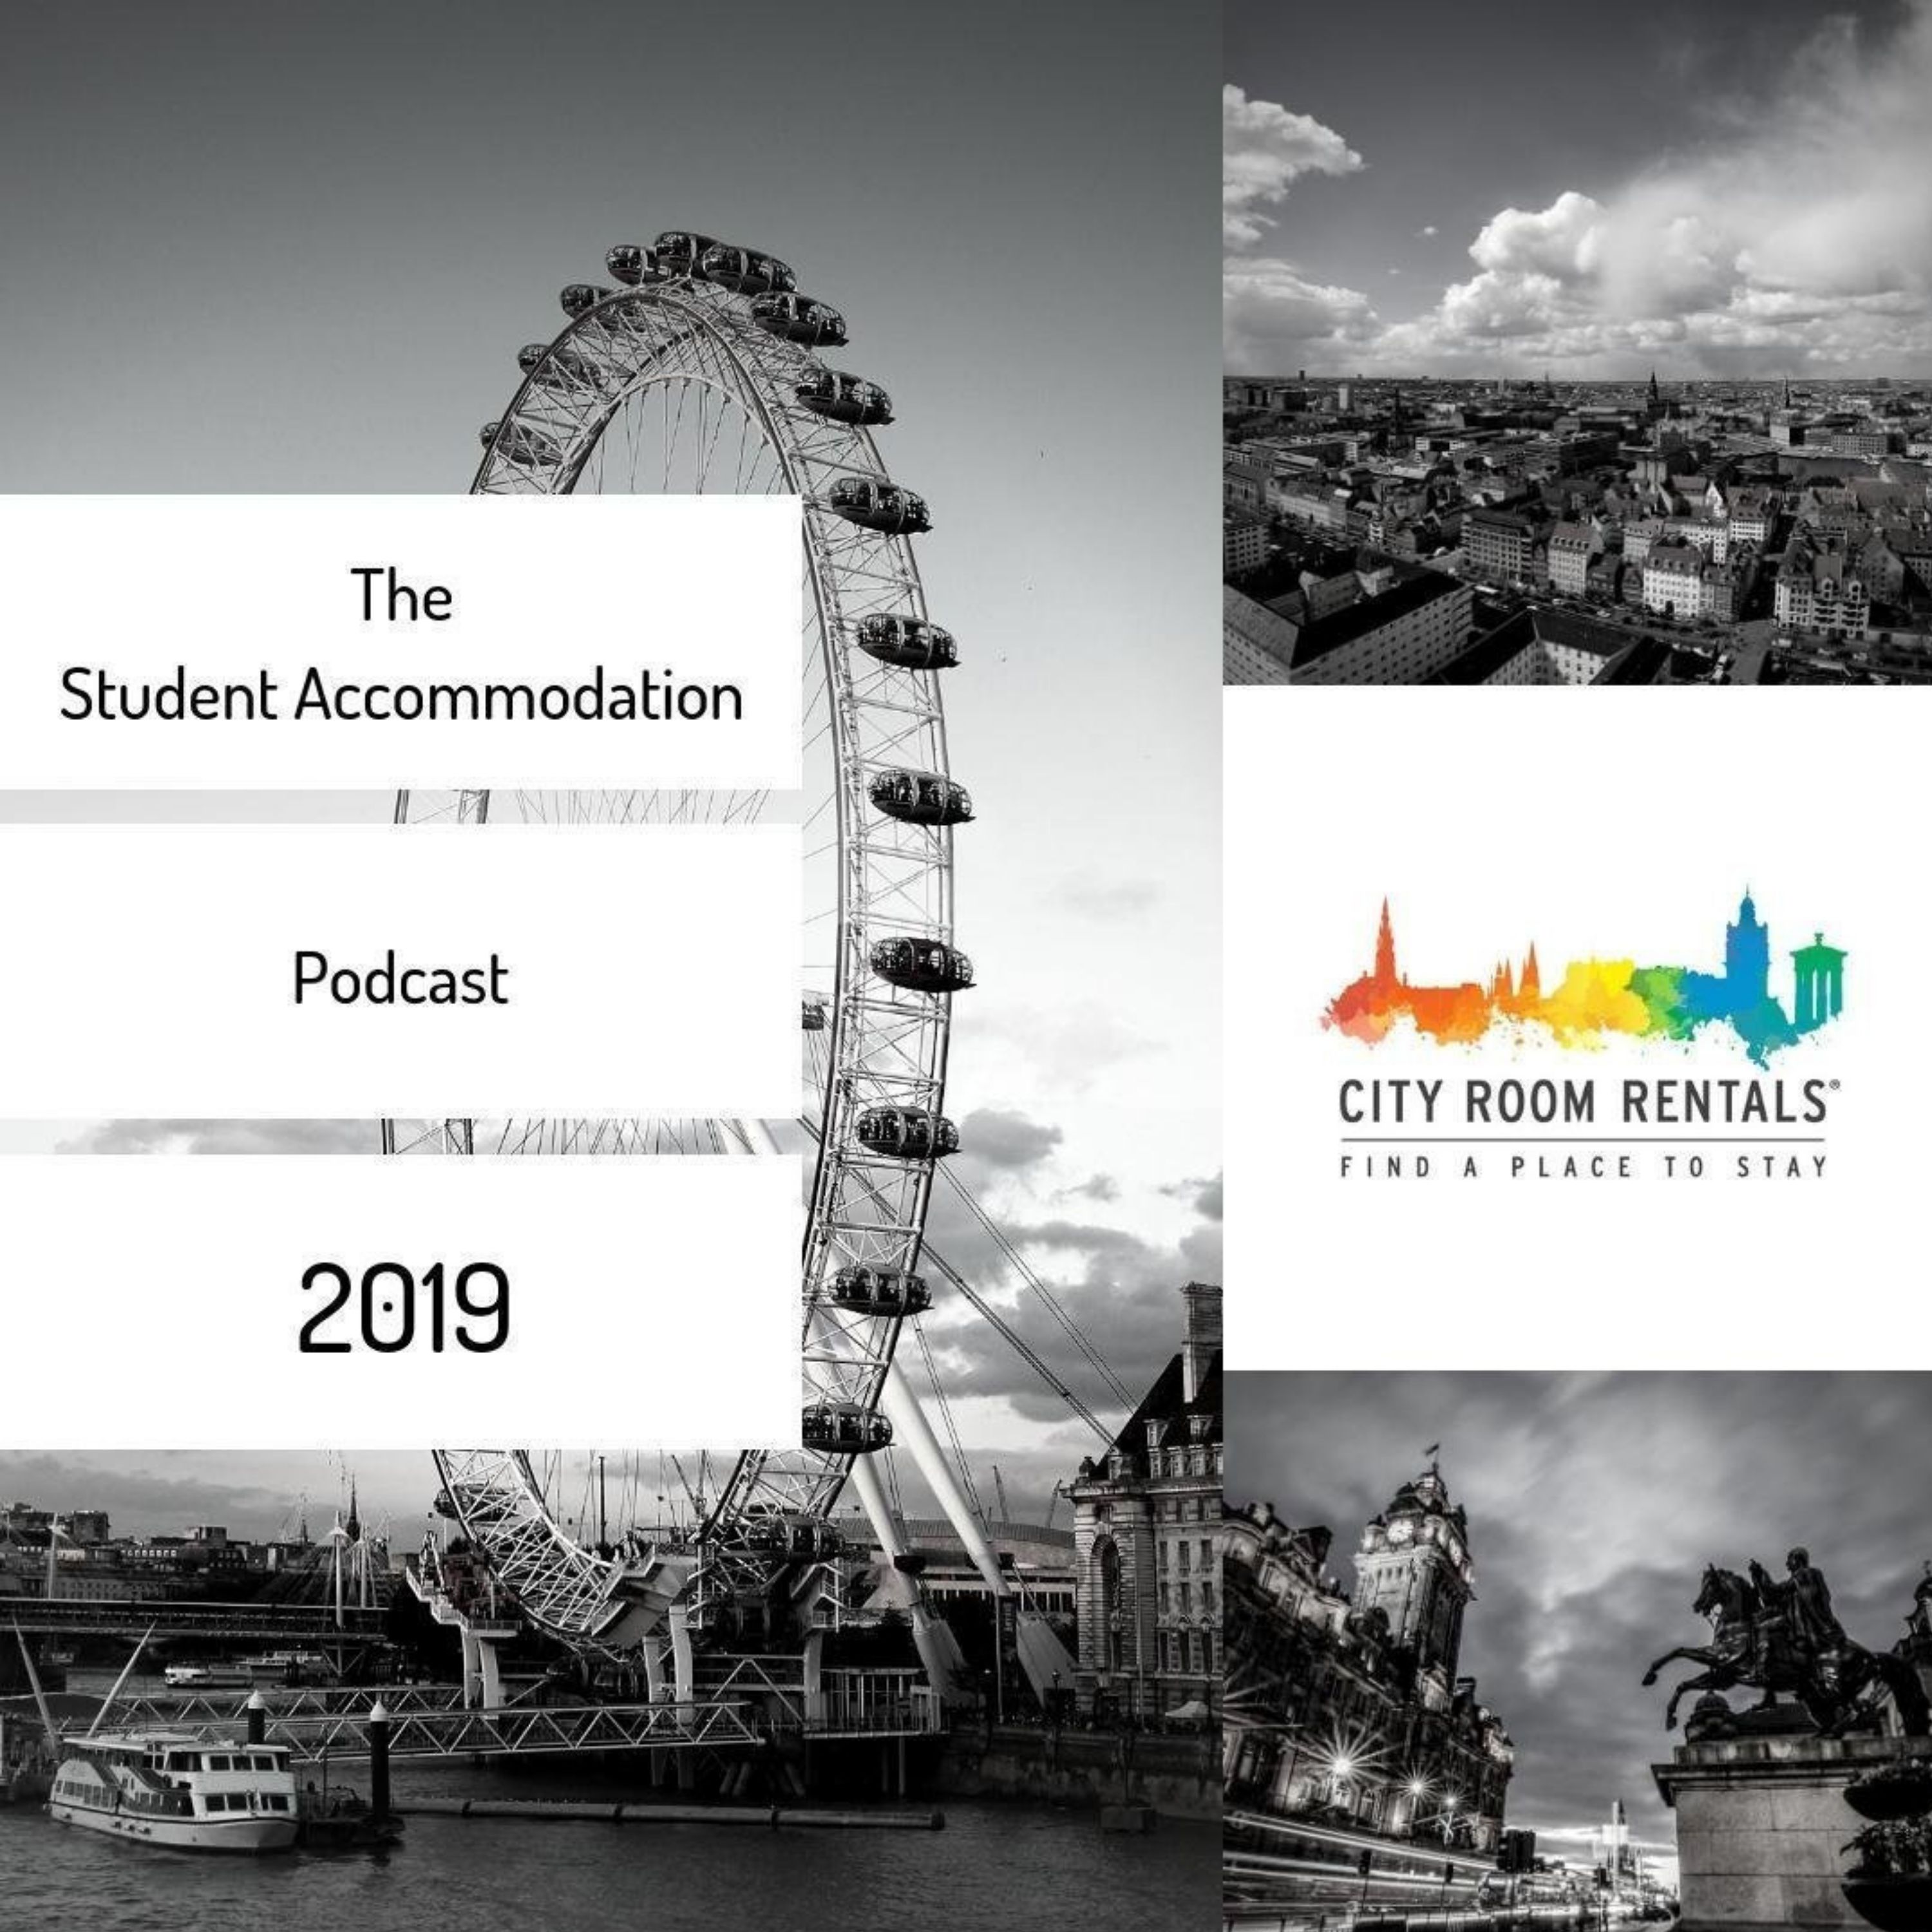 The Student Accommodation Podcast